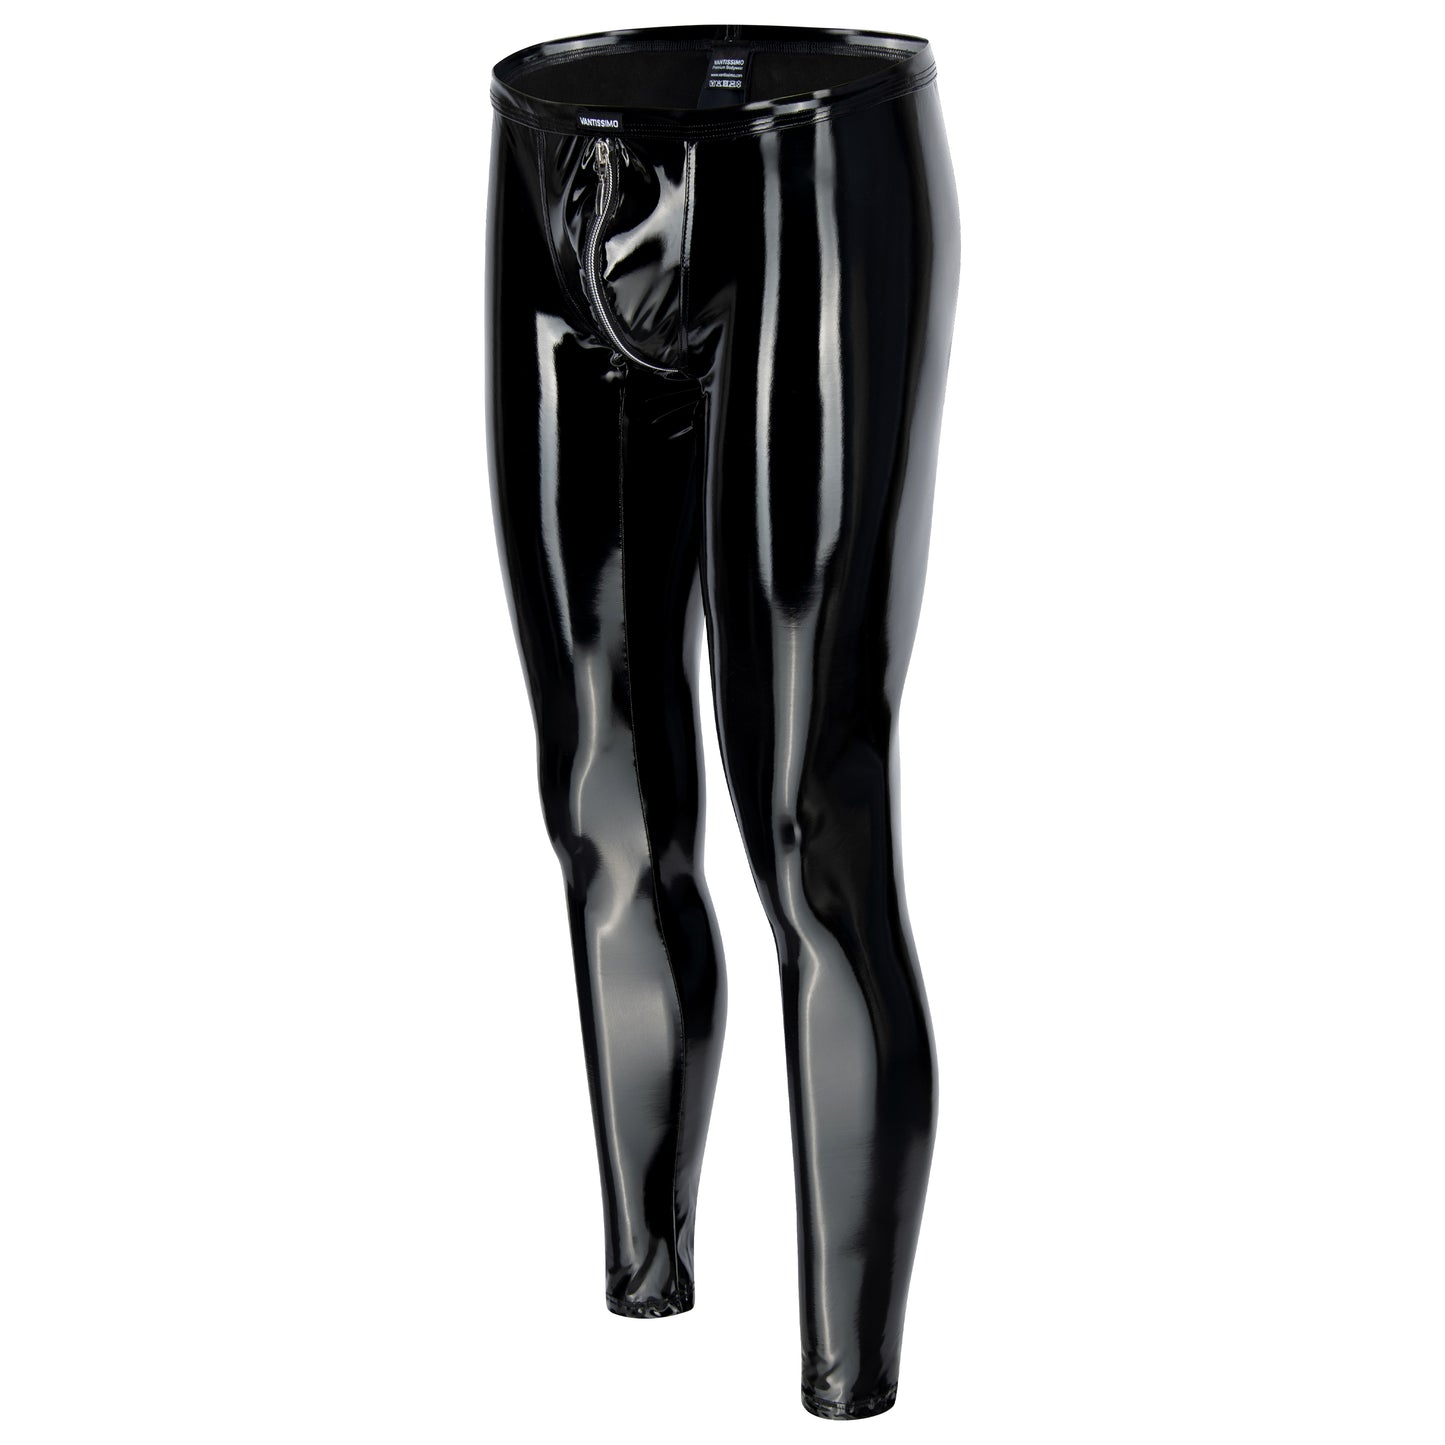 MEN'S ZIPPED LEGGINGS BLACK LACQUER WITH 2-WAY ZIPPER SILVER MEGGINGS HIGH GLOSS LACQUER LATEX LOOK